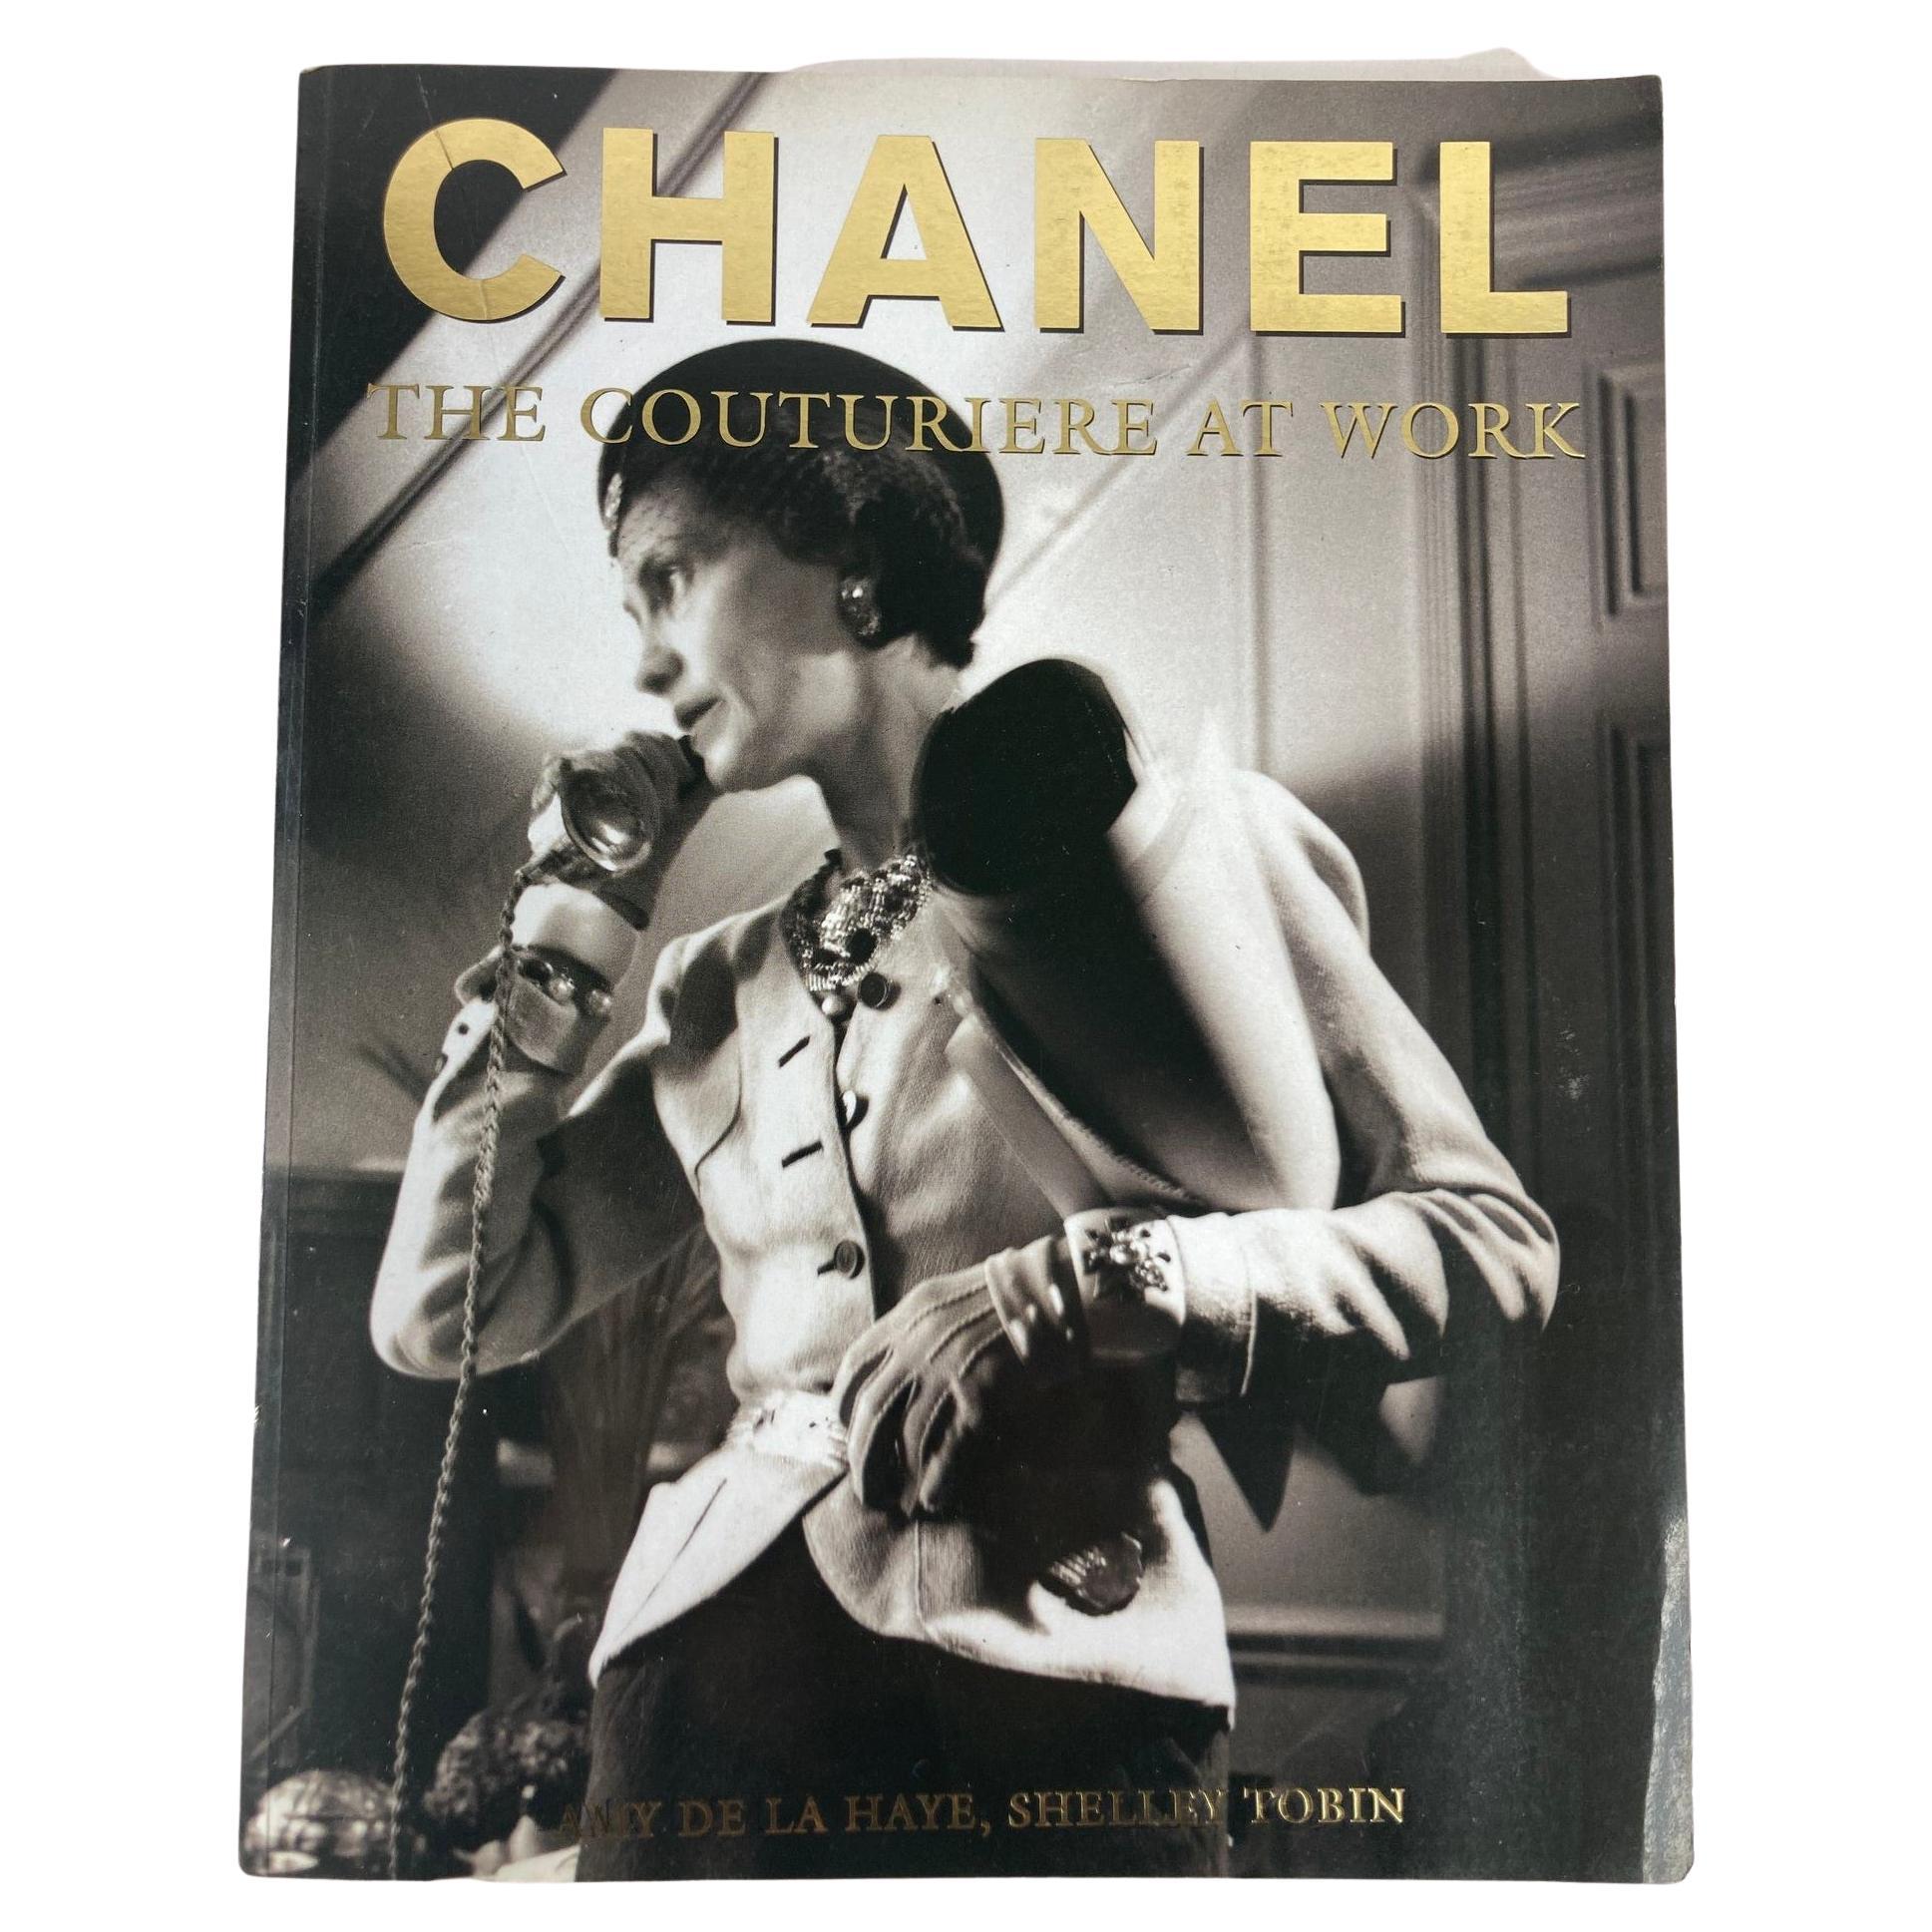 Chanel: The Couturiere at Work Book 1996 1st US Ed. by Amy De la Haye For Sale